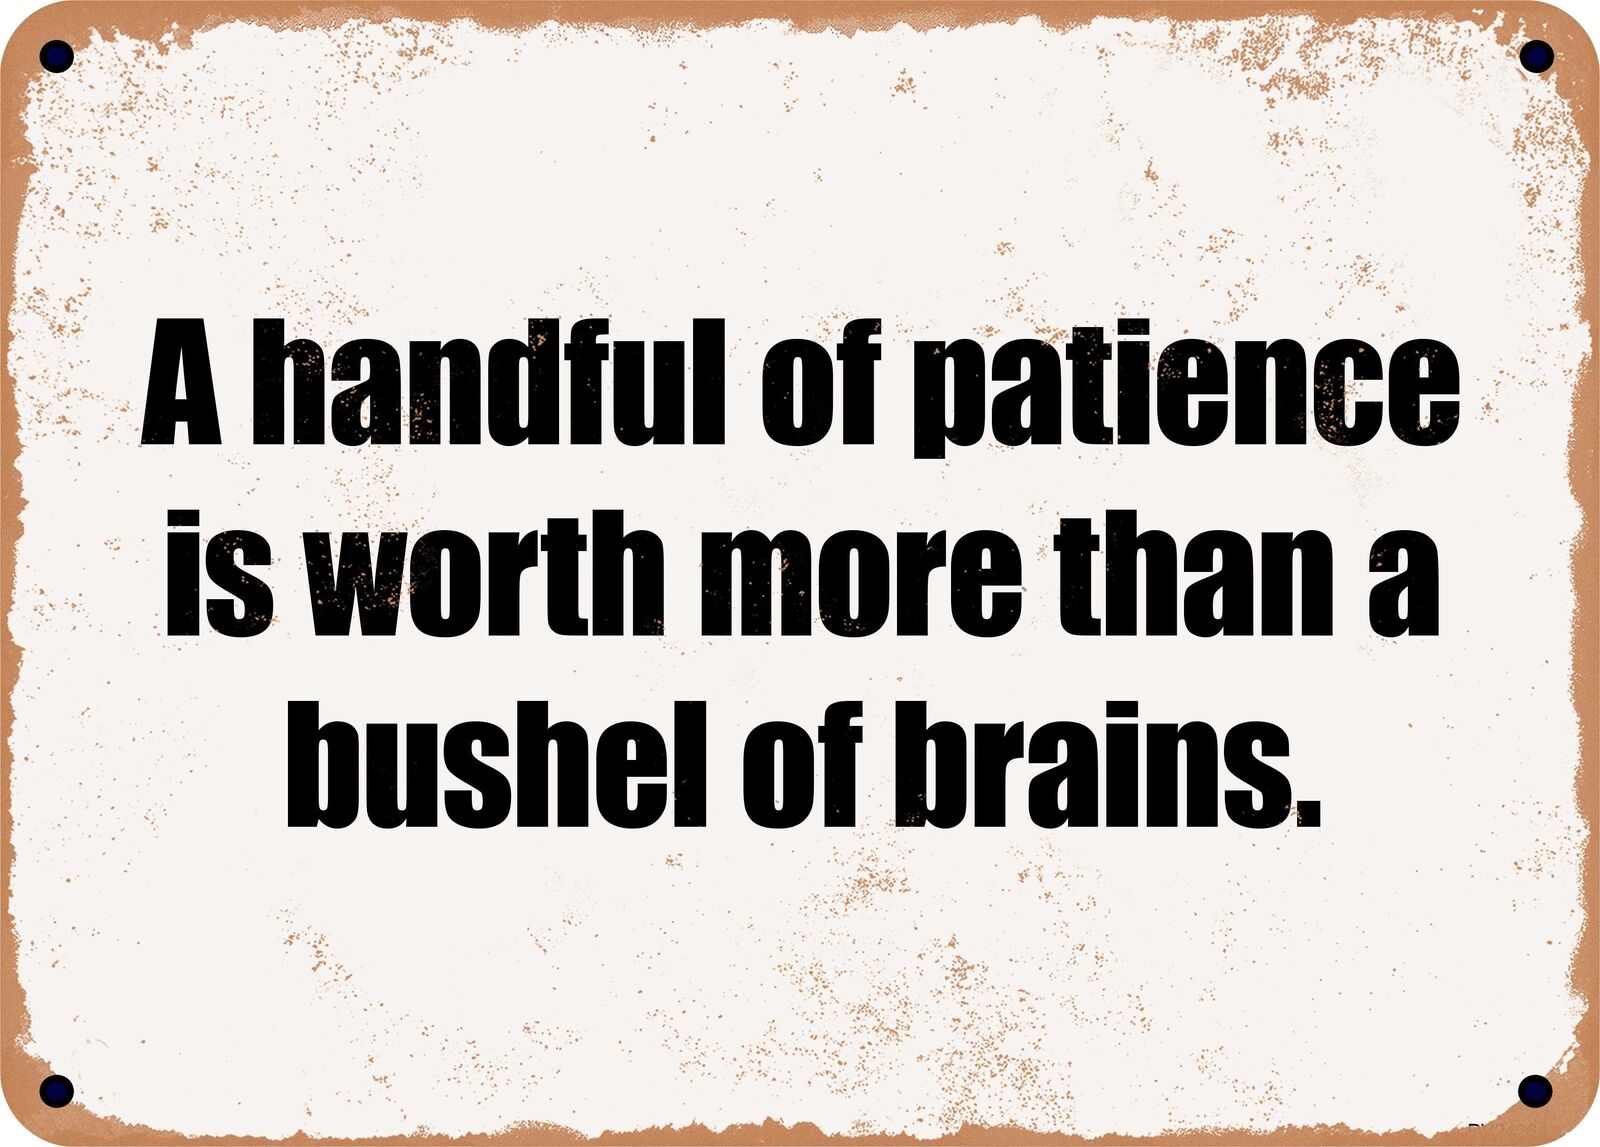 METAL SIGN - A handful of patience is worth more than a bushel of brains.